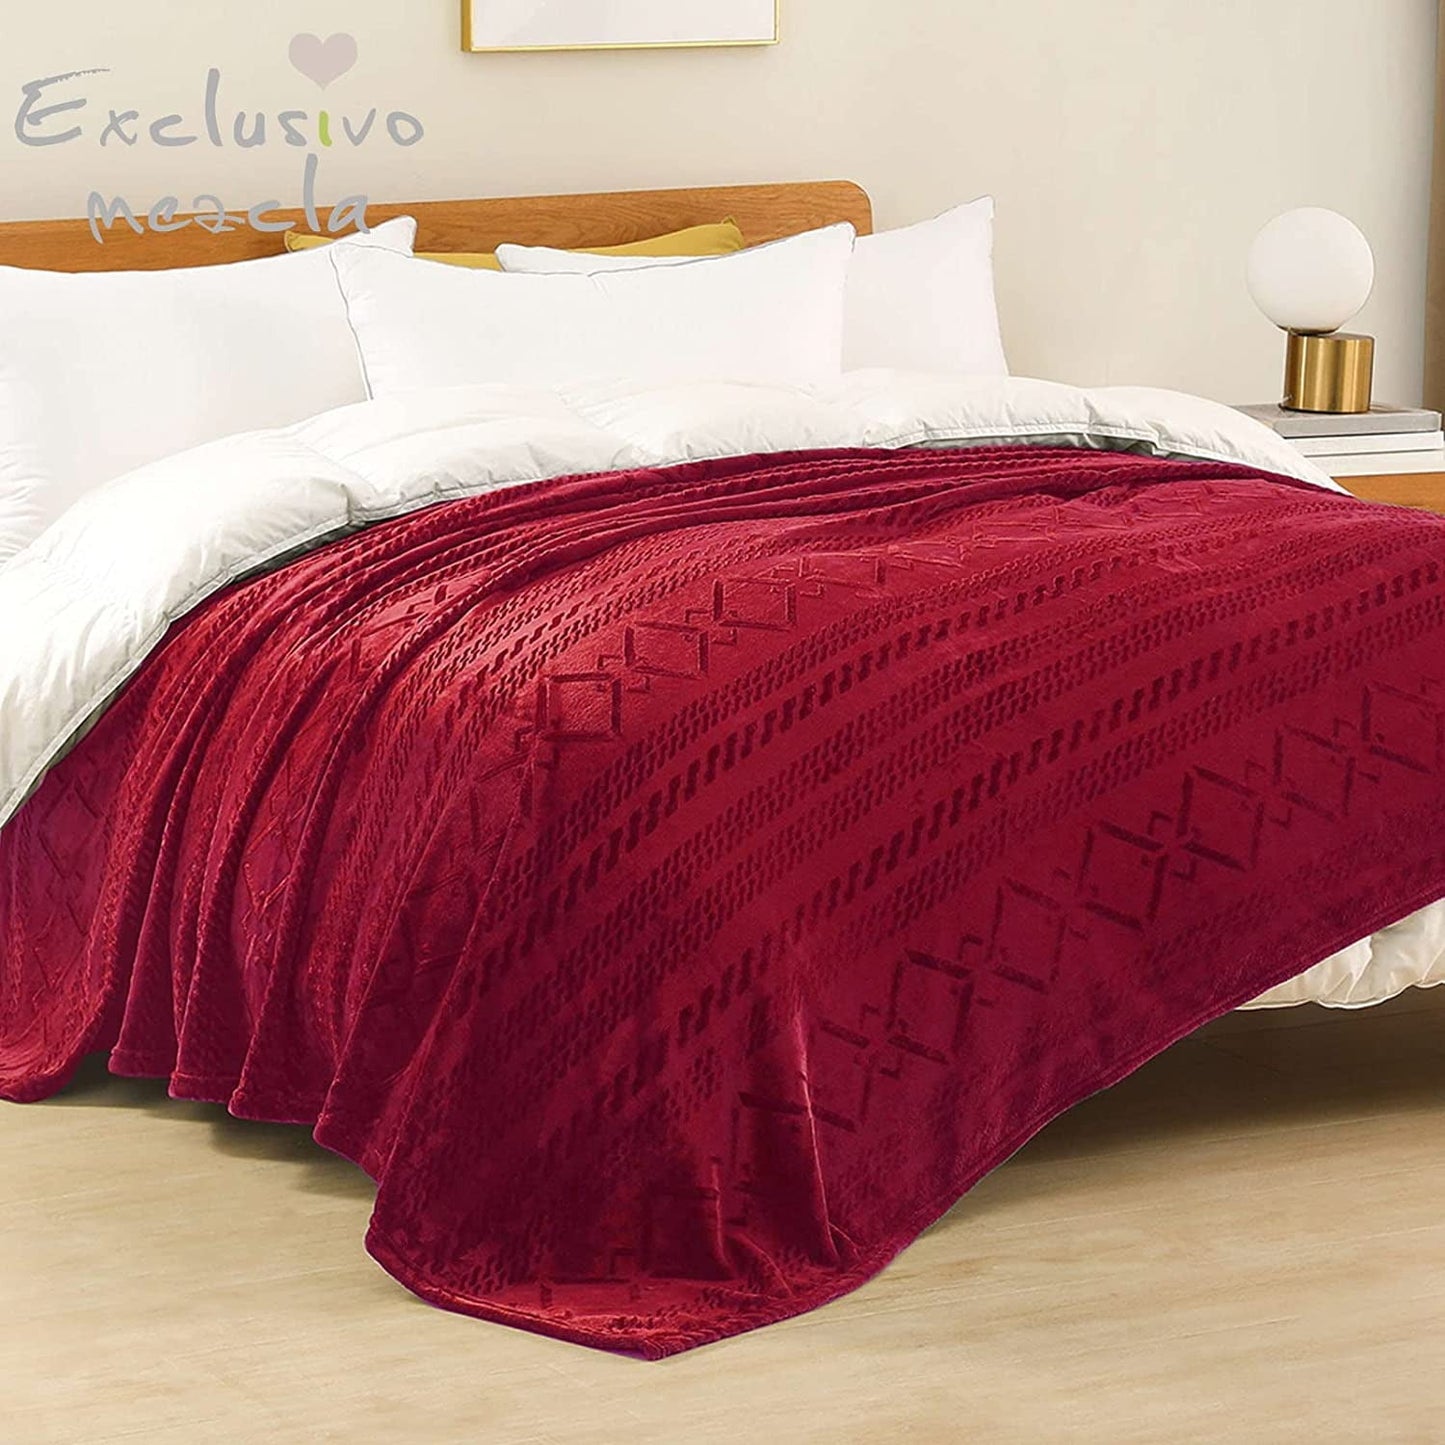 Exclusivo Mezcla Twin Size Soft Bed Blanket, Warm Fuzzy Luxury Bed Blankets, Decorative Geometry Pattern Plush Throw Blanket for Bed, 90x66 Inches, Red